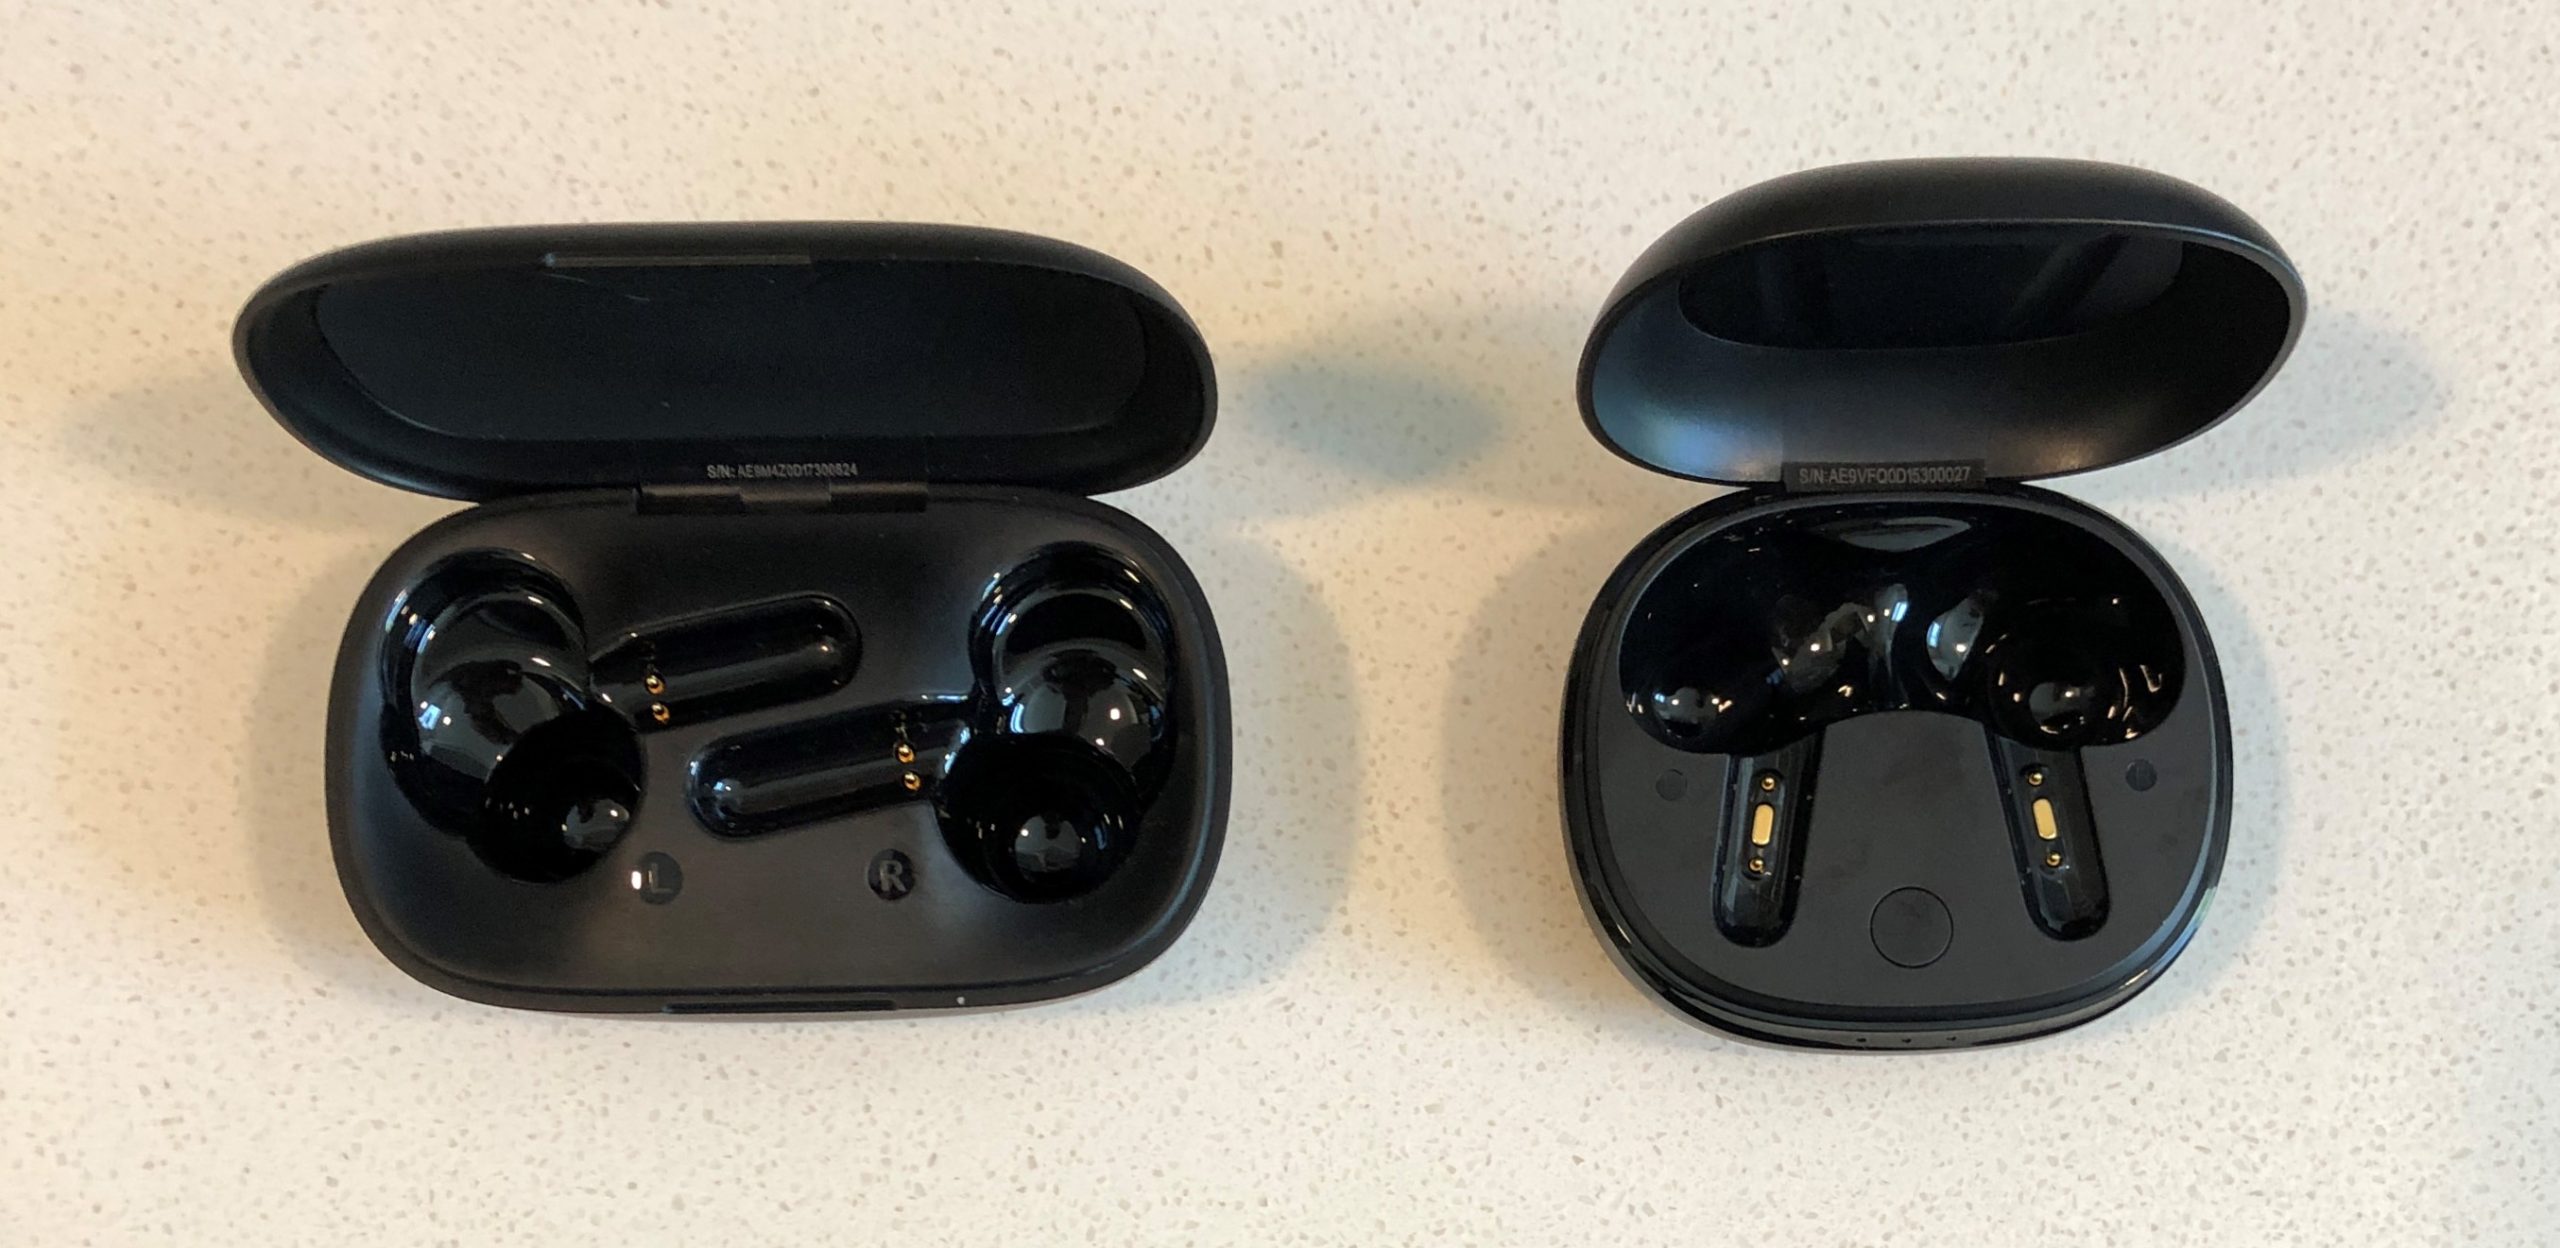 Soundcore Life P2 vs Life P3 charging and carrying case open inside